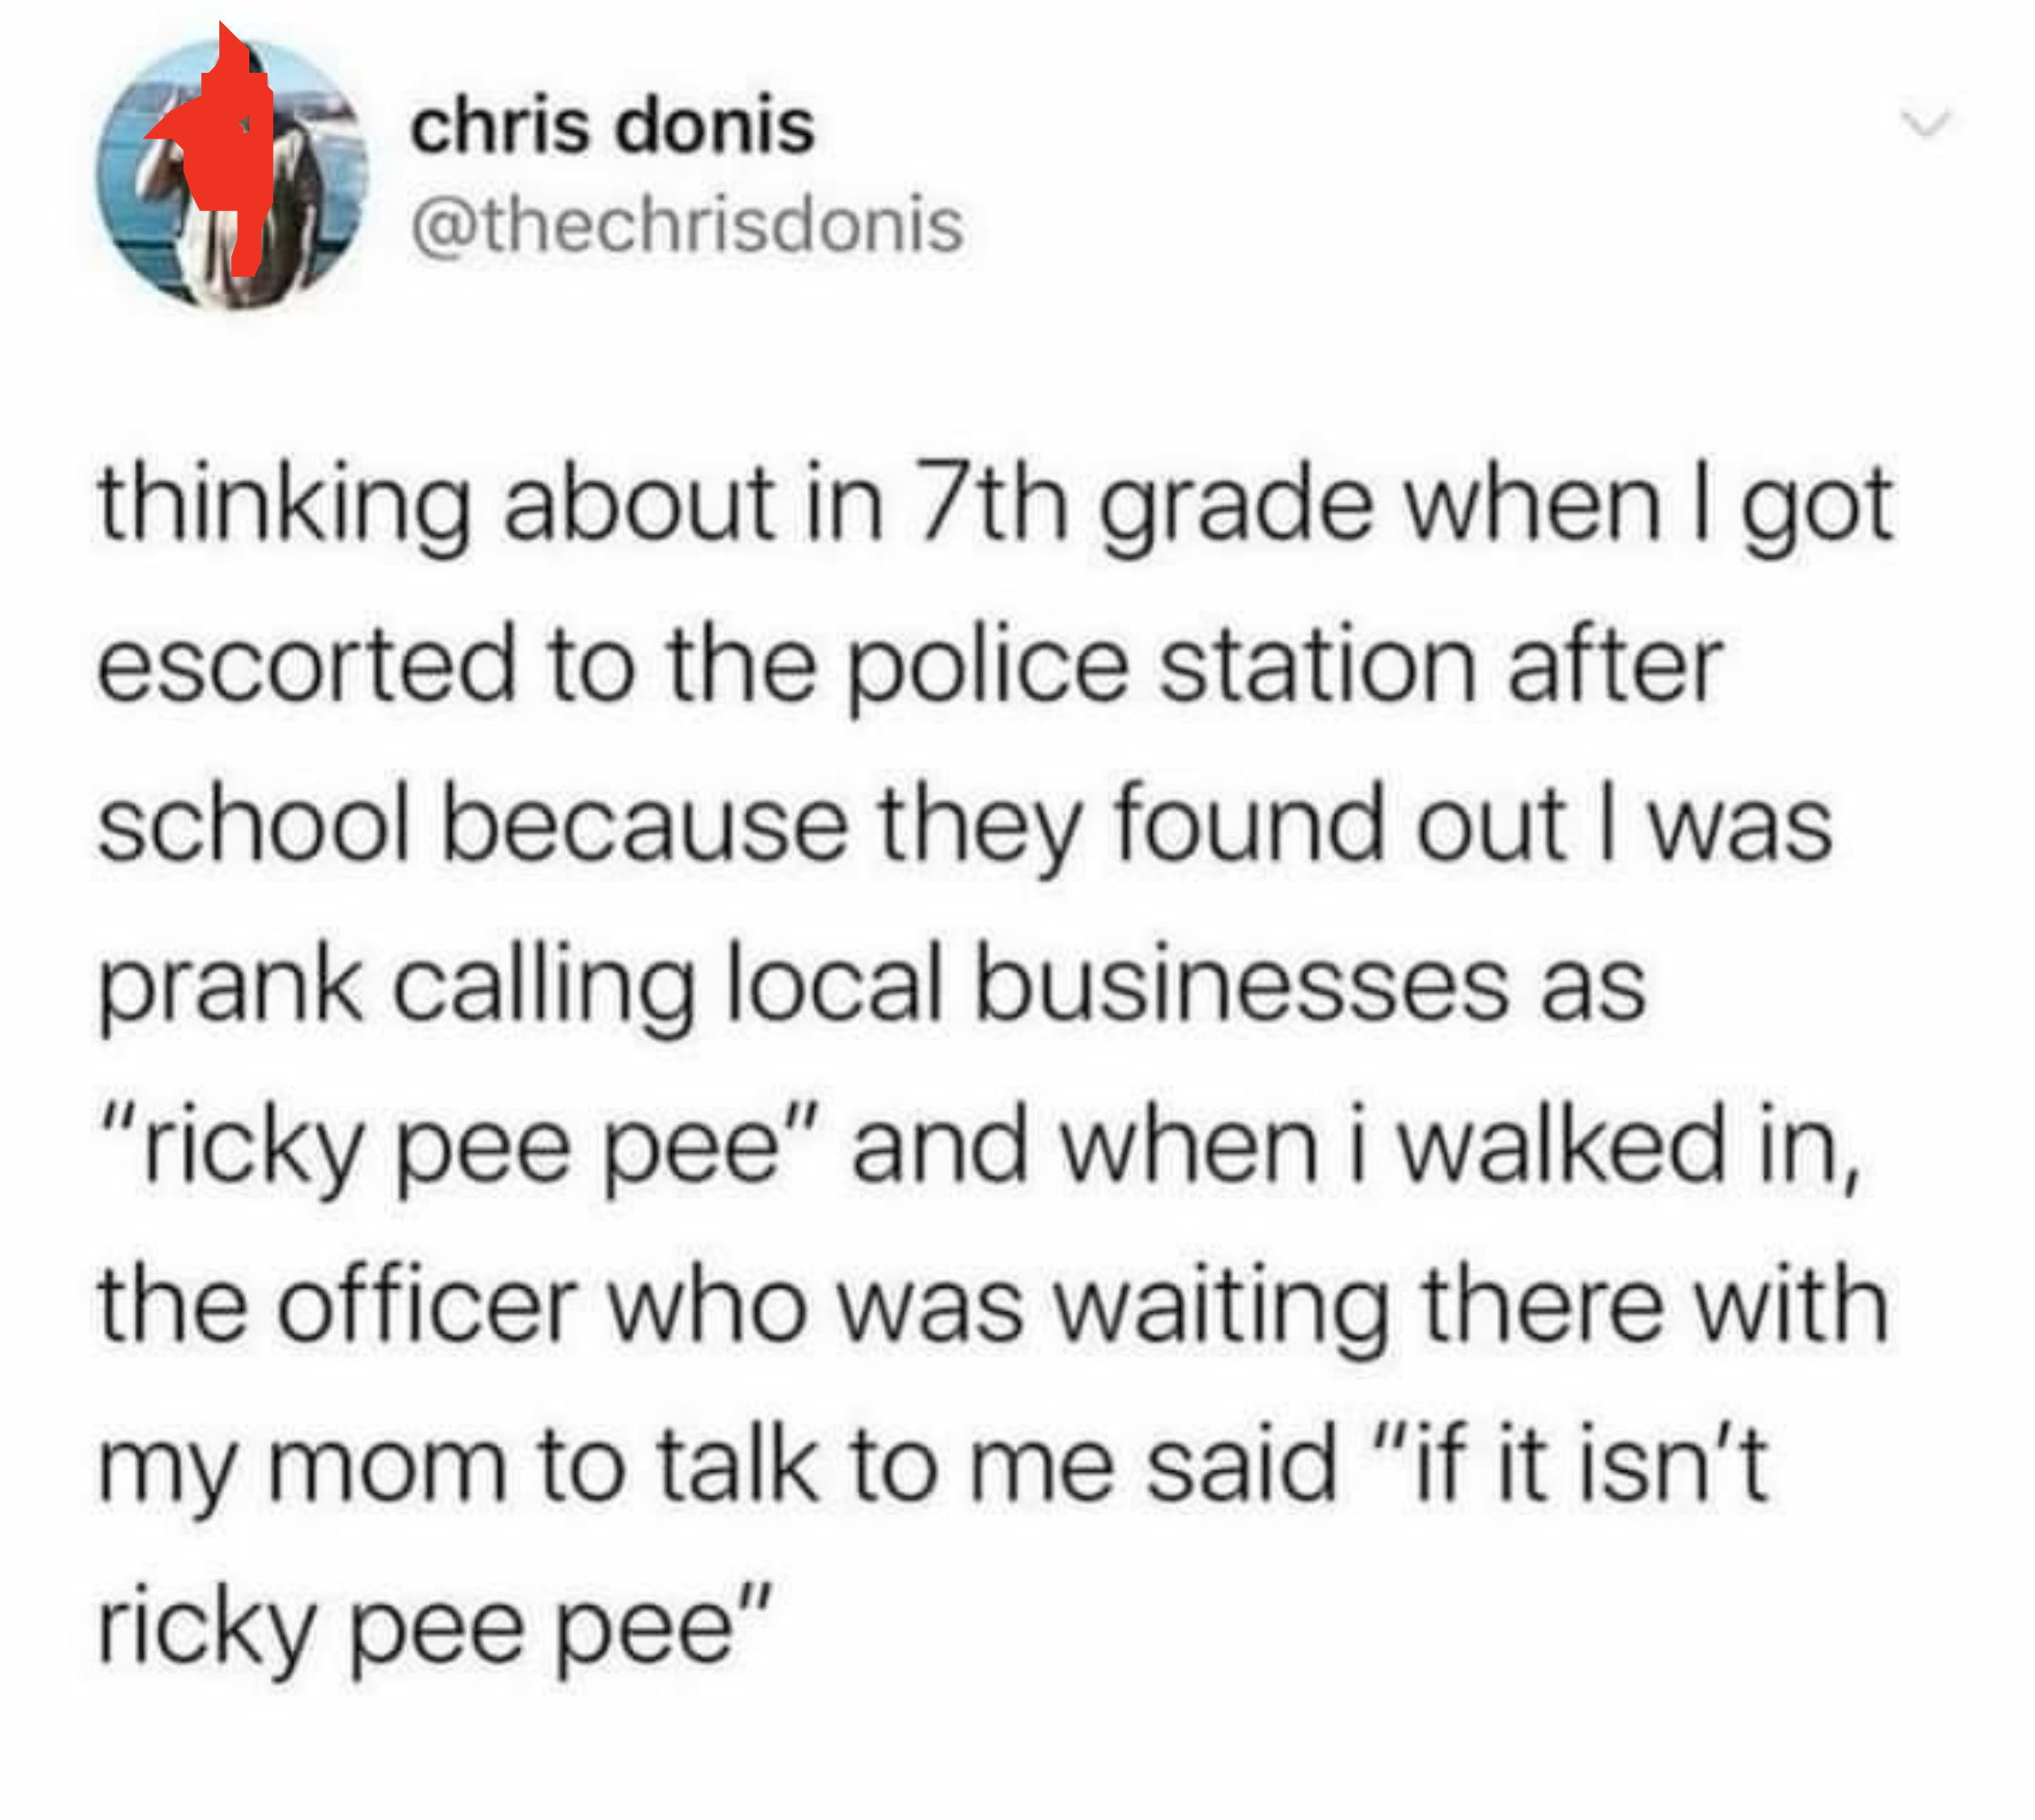 Story about a kid calling himself Ricky Pee Pee during prank calls and getting in trouble, and cops calling him that